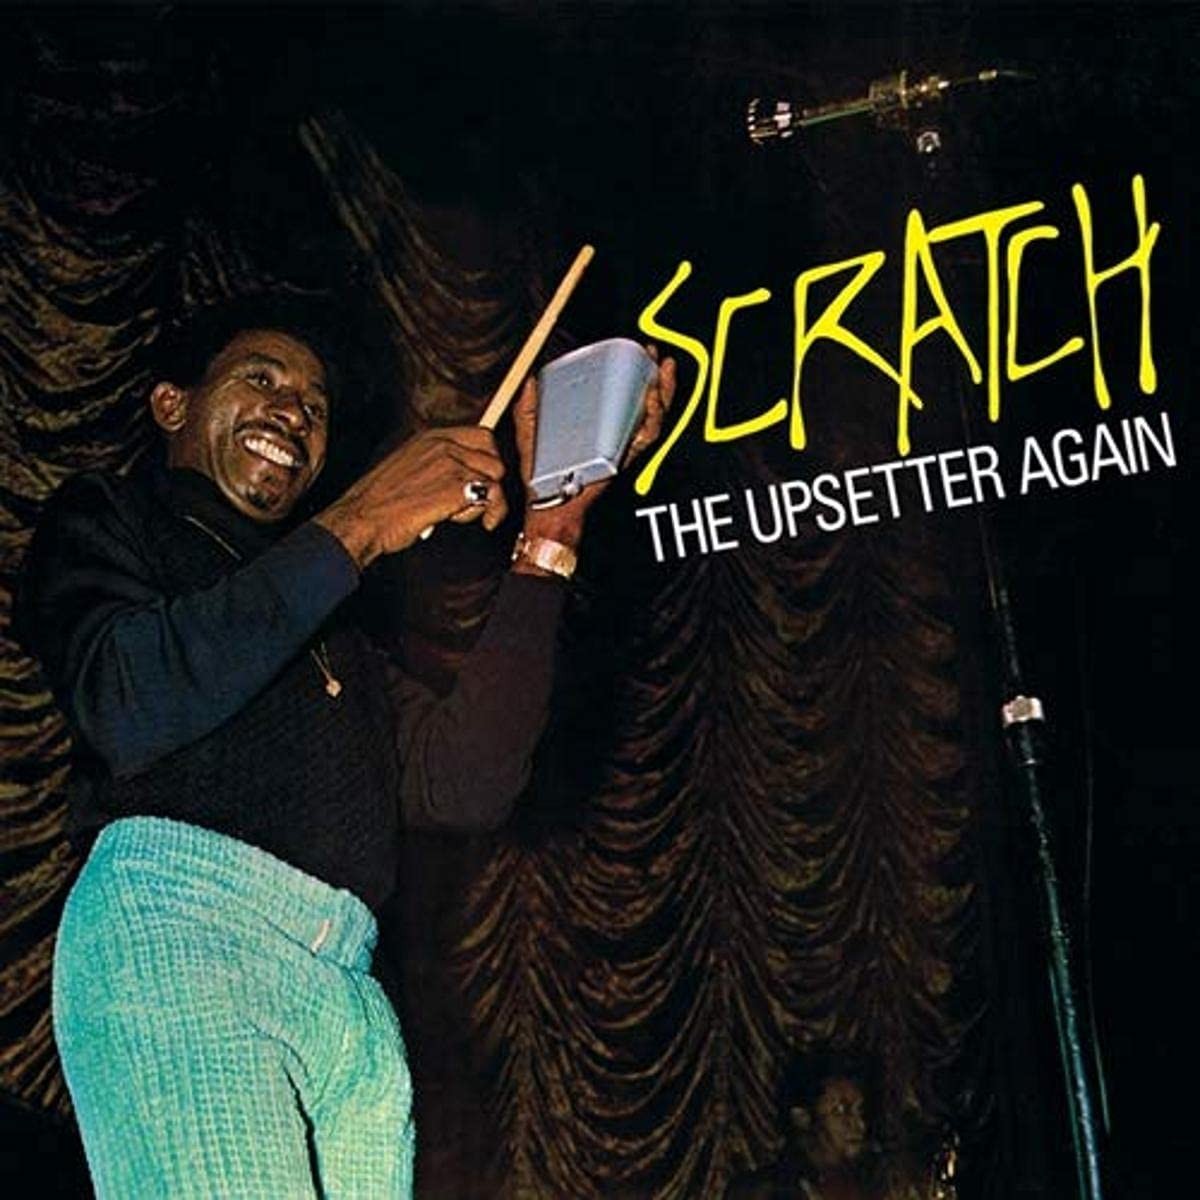 Upsetters - Scratch The Upsetter Again